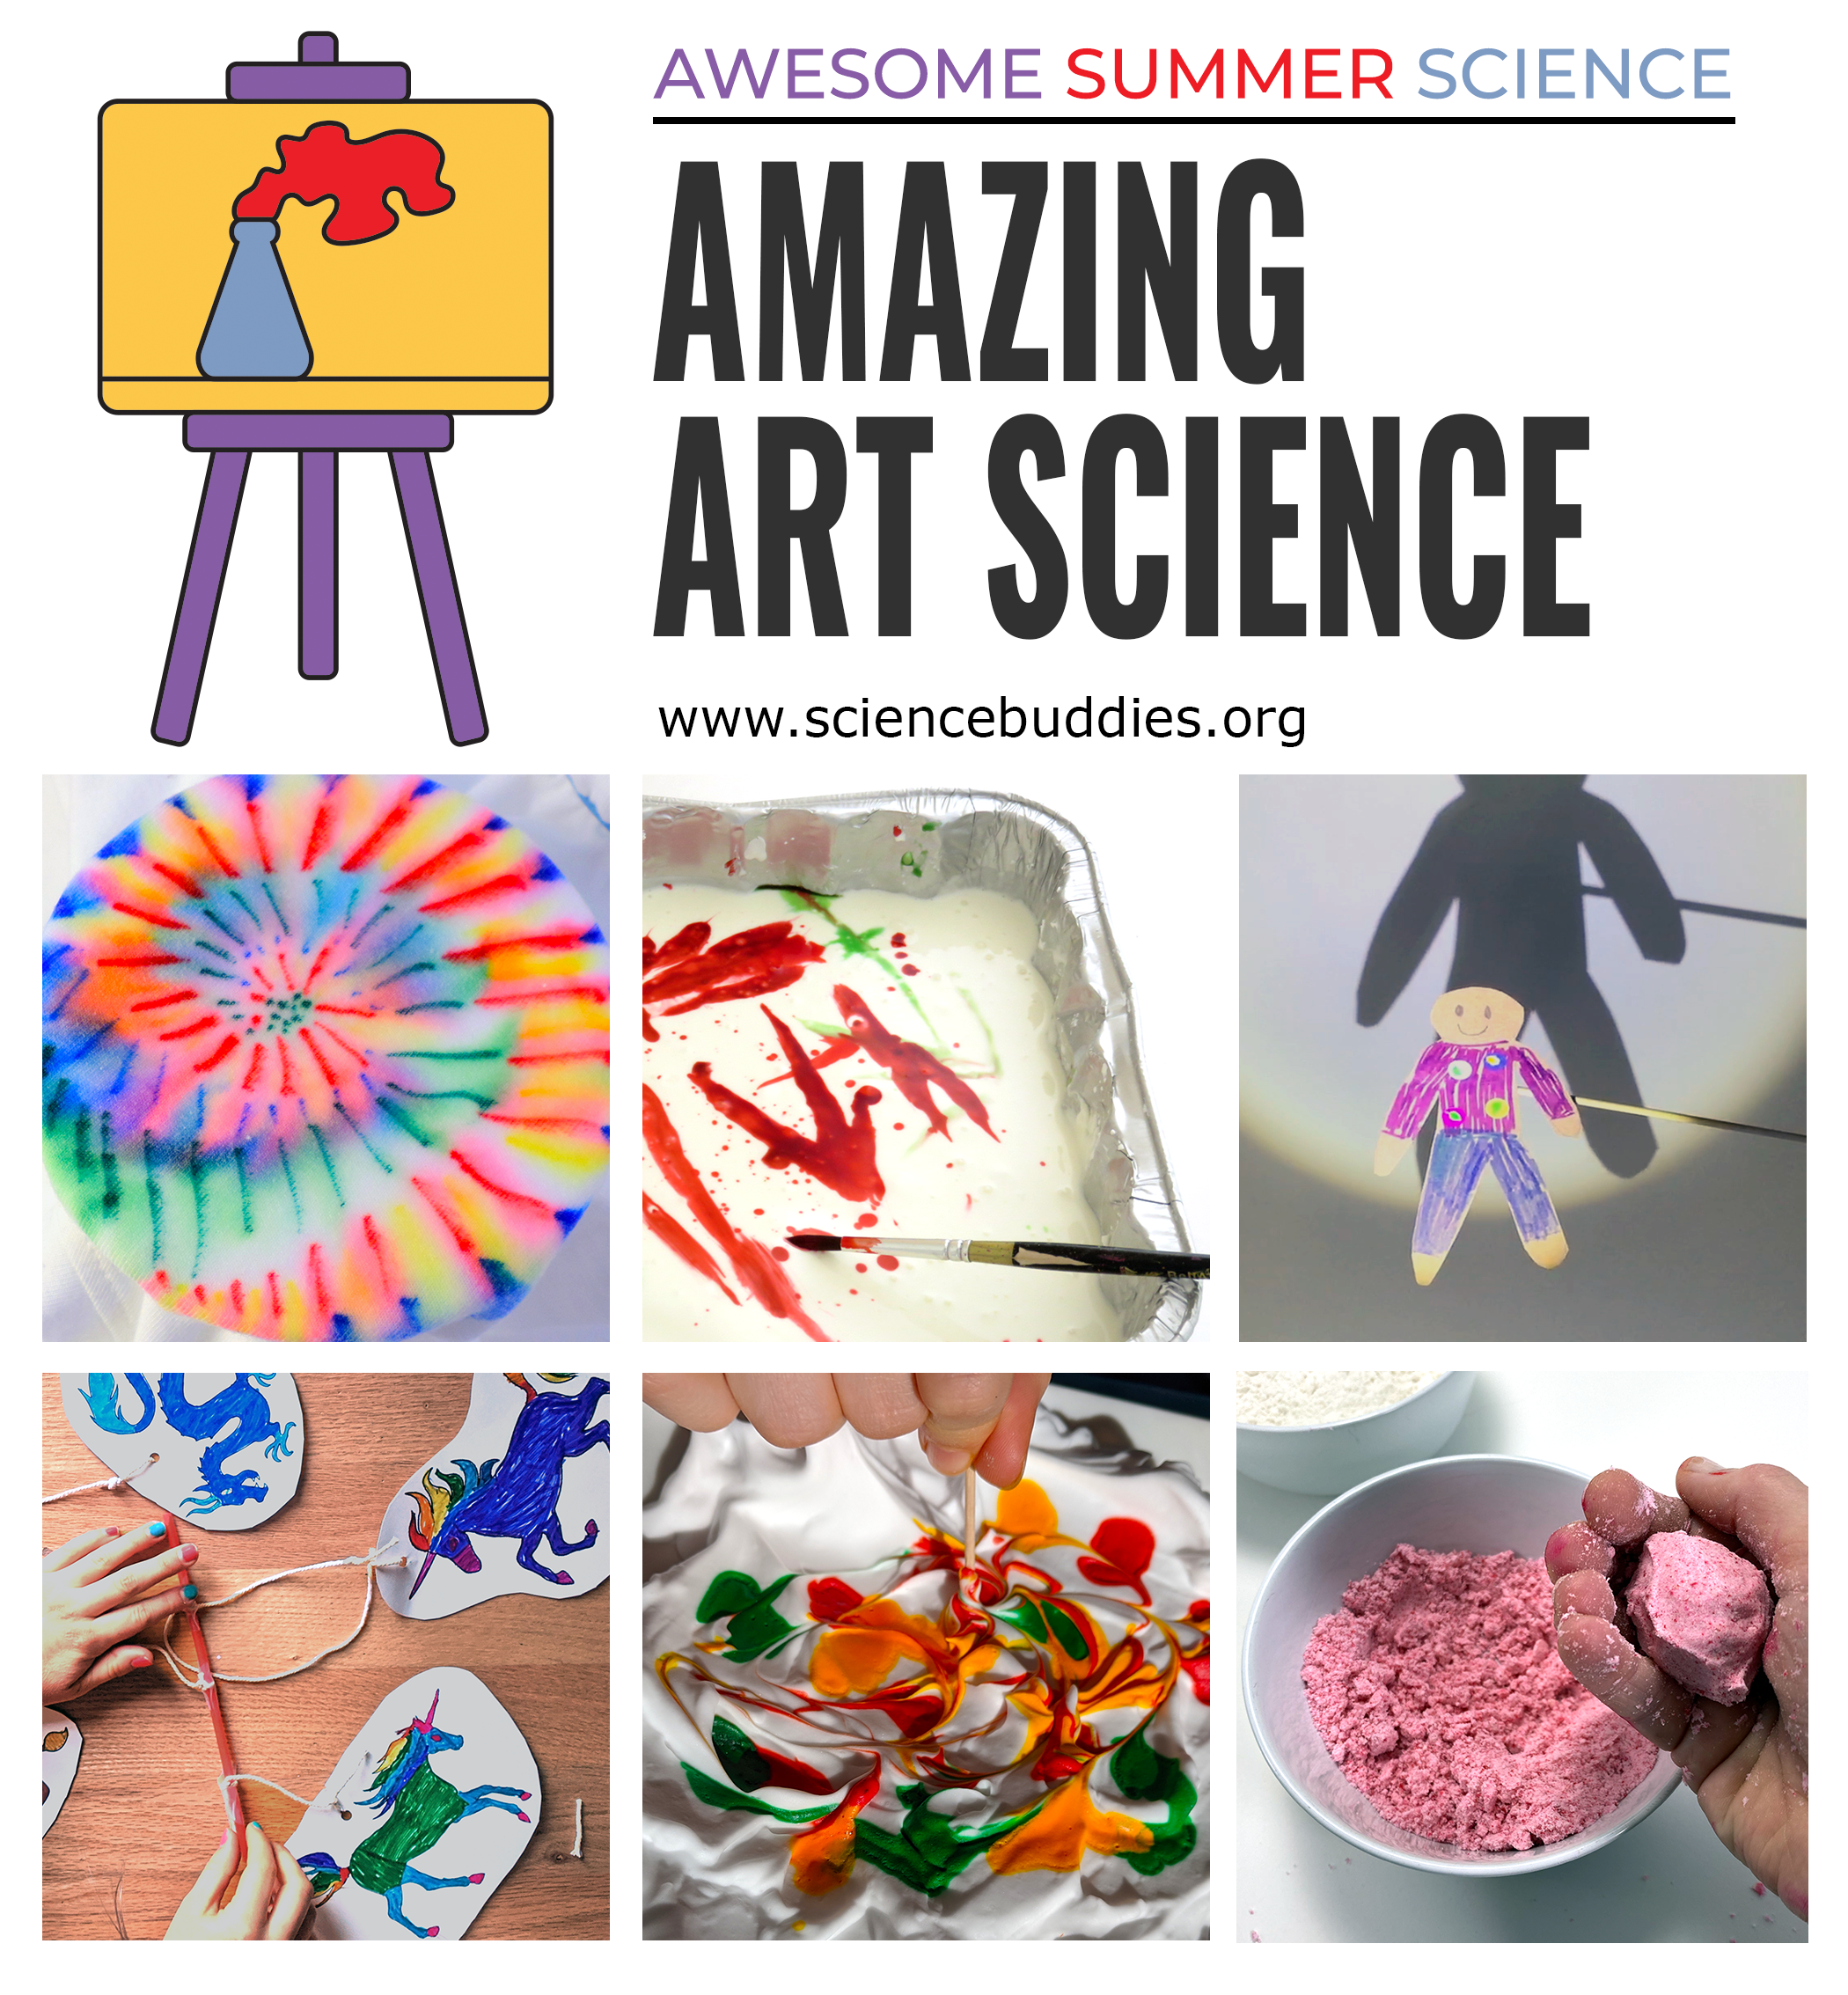 Marble art, shadow puppet, marker tie-dye, kinetic dough sculpture, and art mobile for Amazing Art Science Week 5 - part of Awesome Summer Science Experiments series